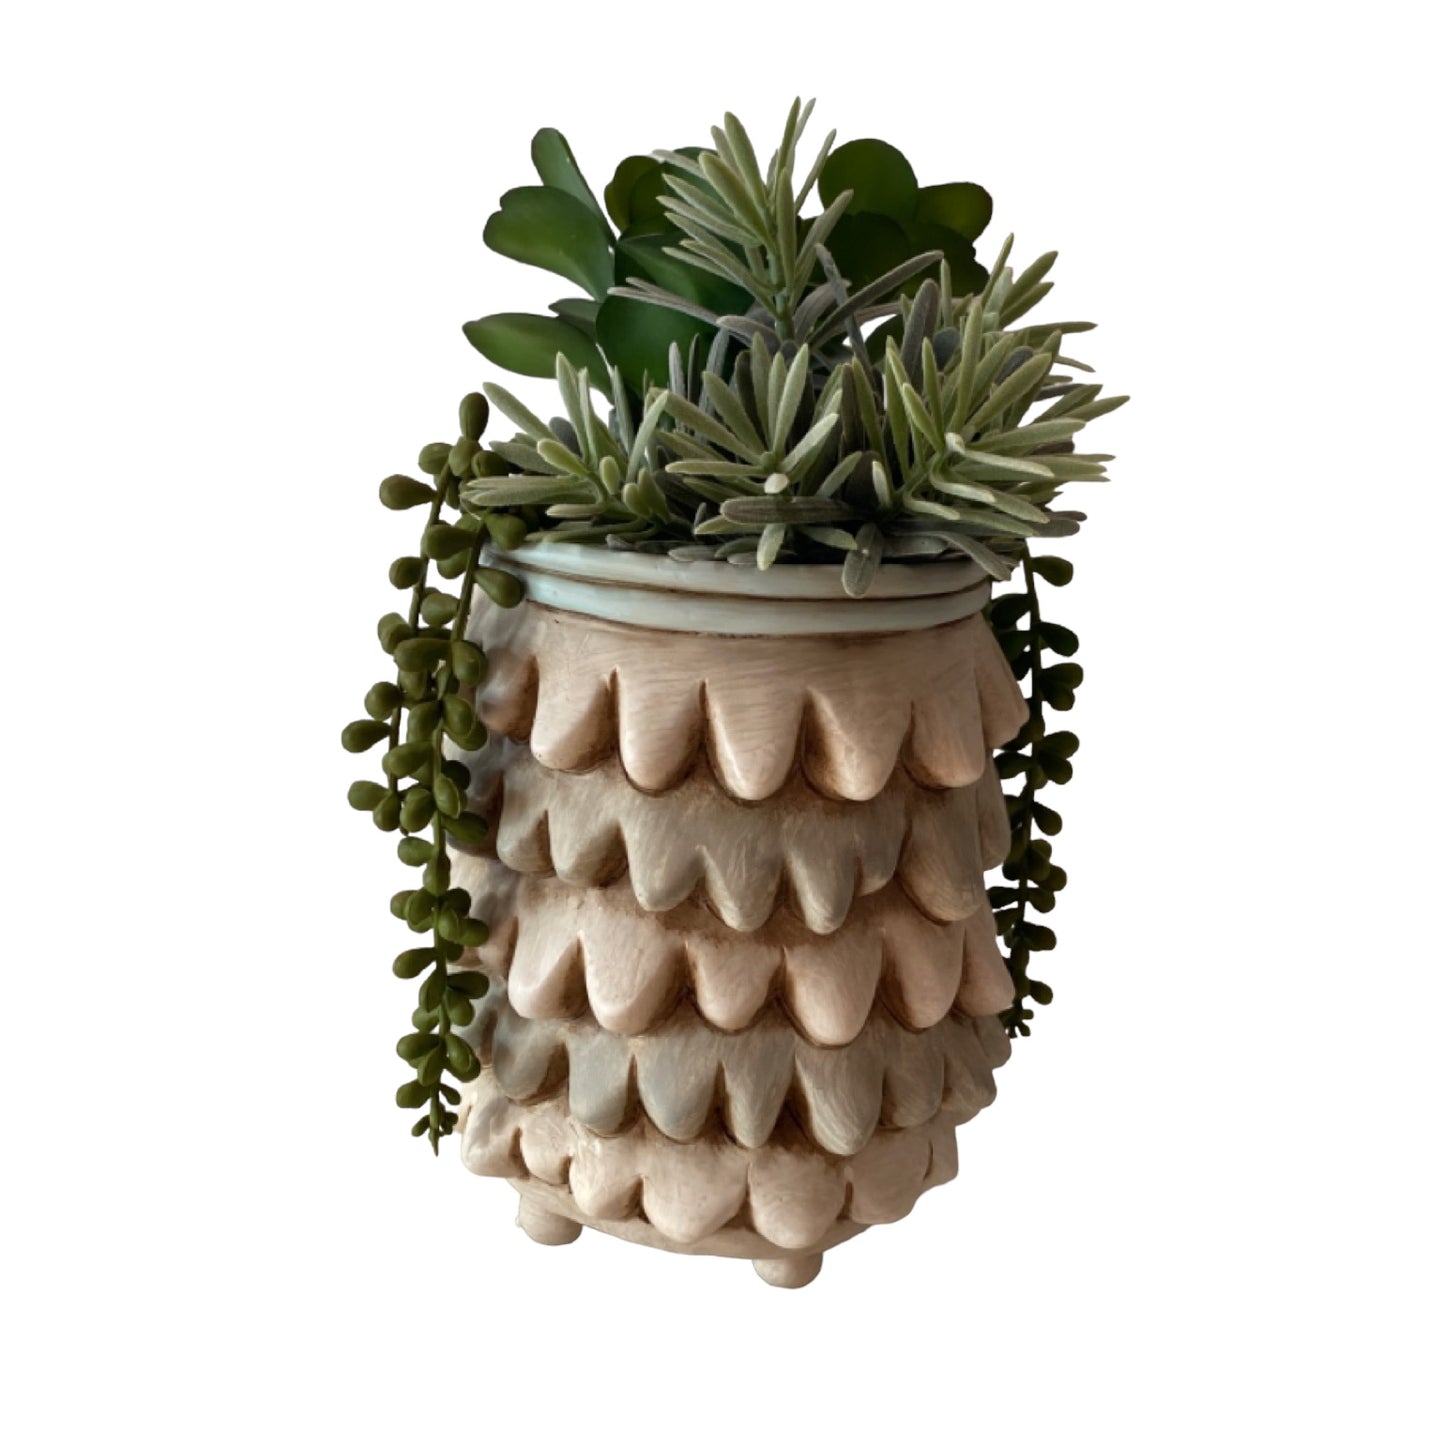 Pot or Vase Planter Vera Fringe Grey Plant Large - The Renmy Store Homewares & Gifts 